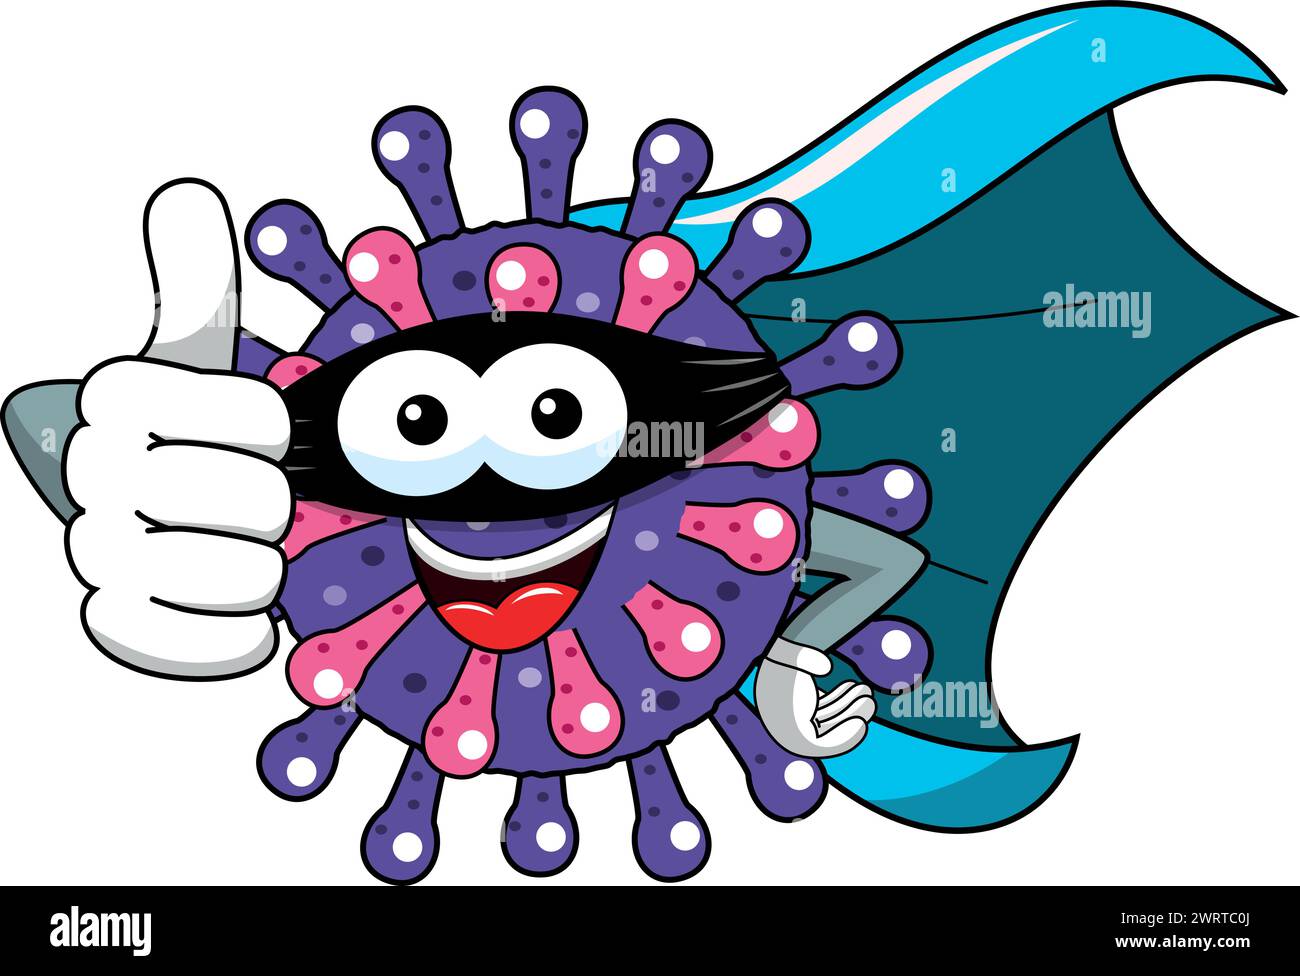 Cartoon mascot character virus or bacterium superhero cape and mask isolated vector illustration Stock Vector